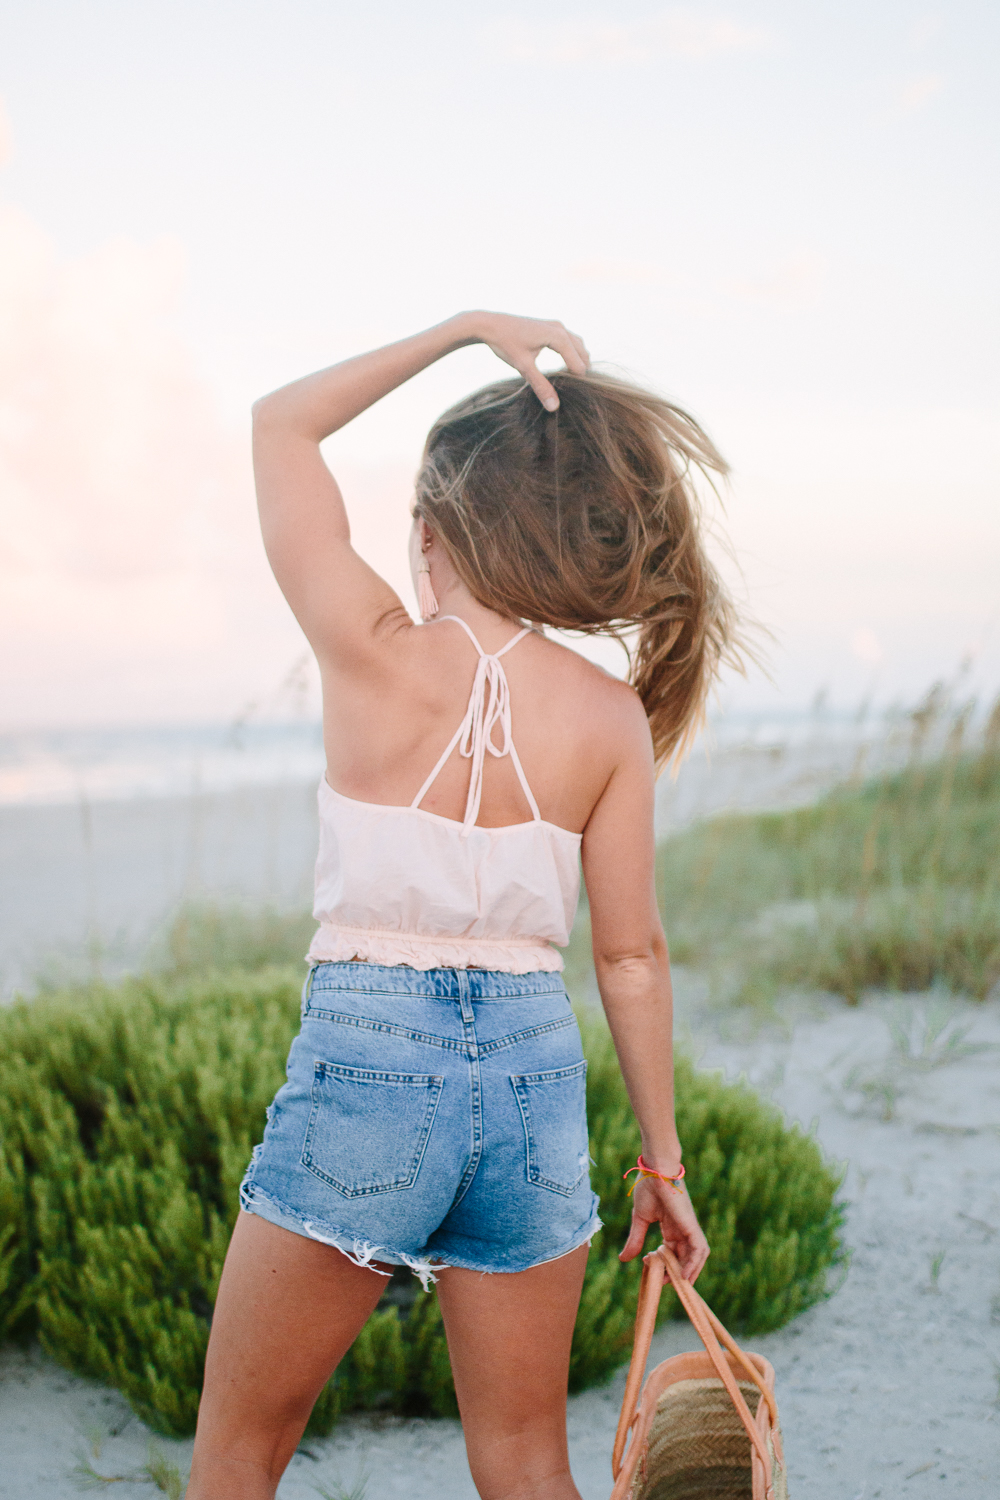 What to Wear to the Beach: A Casual Summer Outfit featuring an Aerie Crop Top, H&M High Waist Denim Shorts and Straw Beach Bag